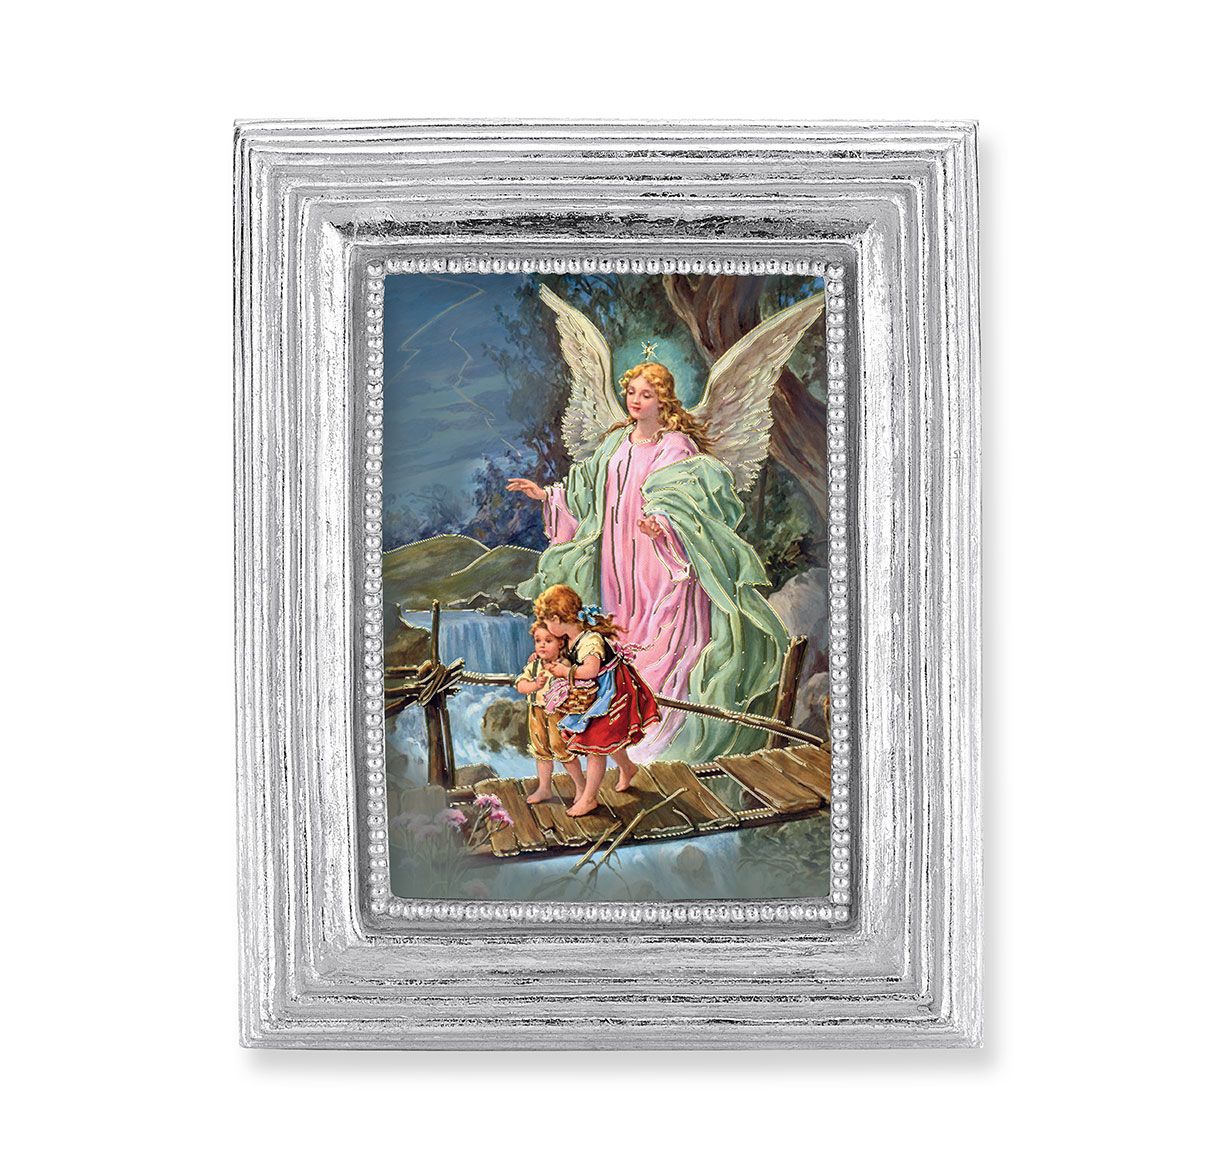 3 3/4" x 4 1/2" Silver Frame with a Guardian Angel Print